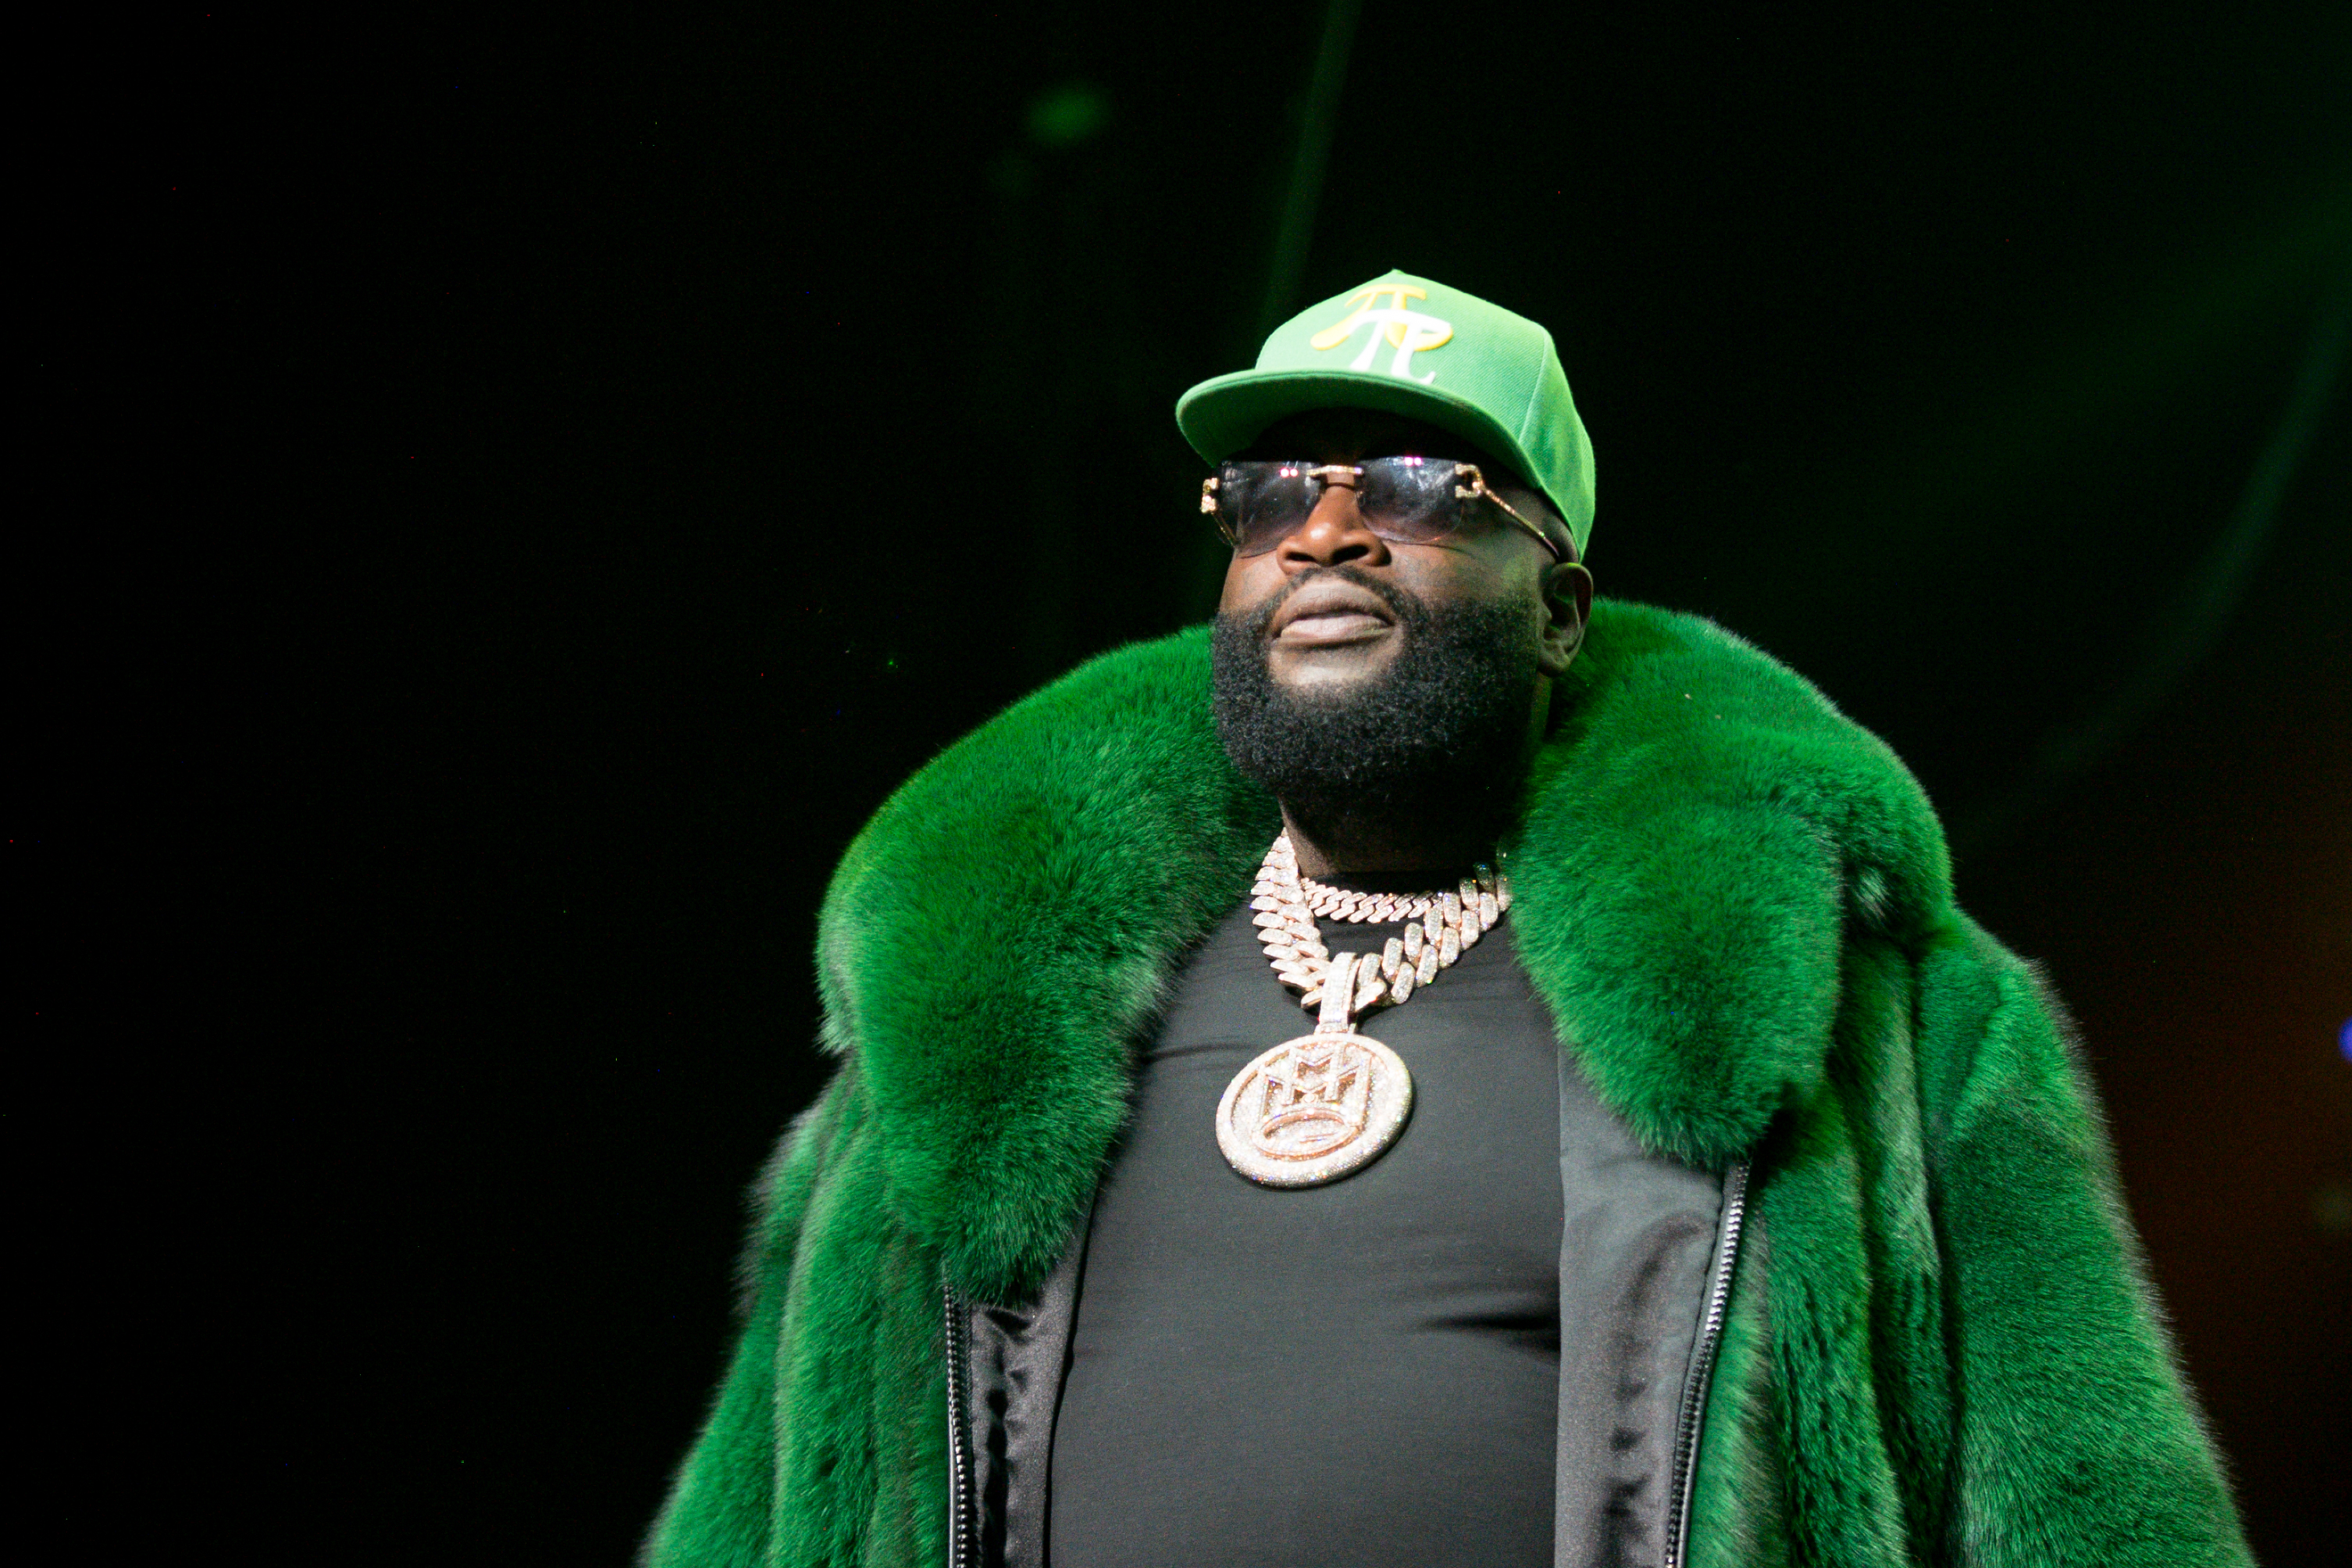 Rapper Rick Ross performs on stage during the Legendz of the Streetz Tour Reloaded at Toyota Center on February 04, 2023 in Houston, Texas. | Source: Getty Images